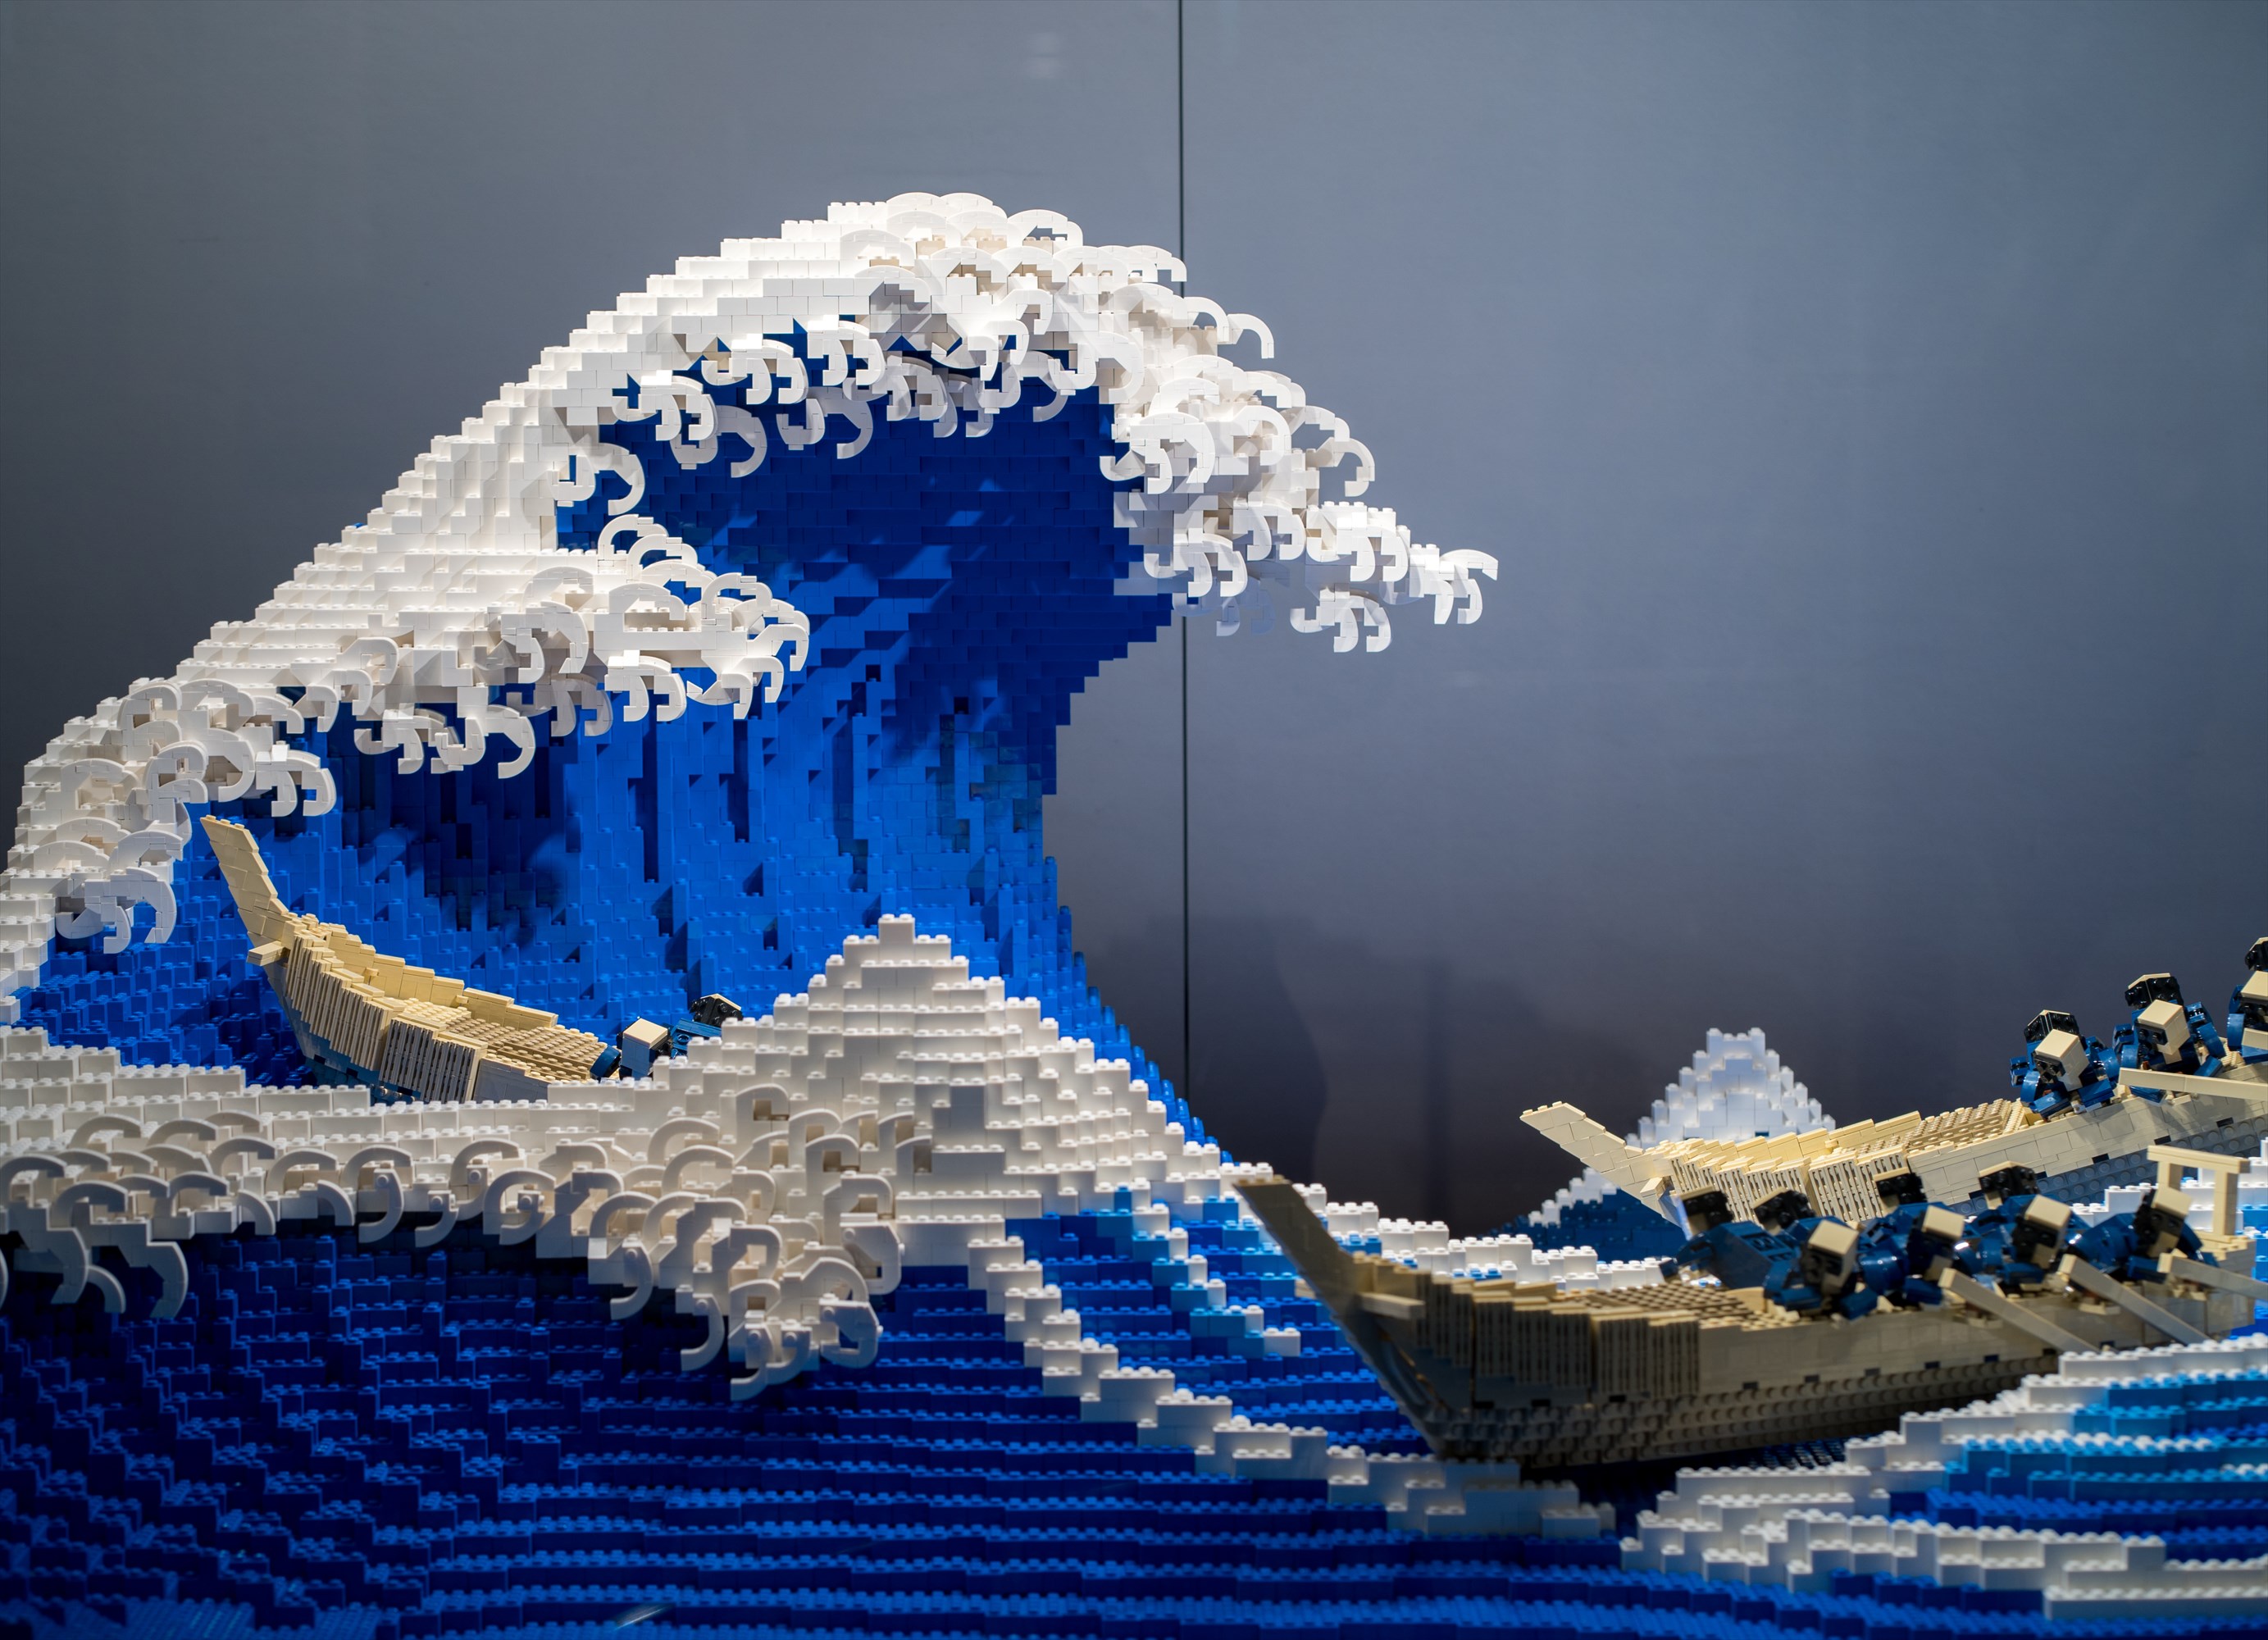 Japan-Based Sculptor Recreates 'The Great Wave Off Kanagawa' With 